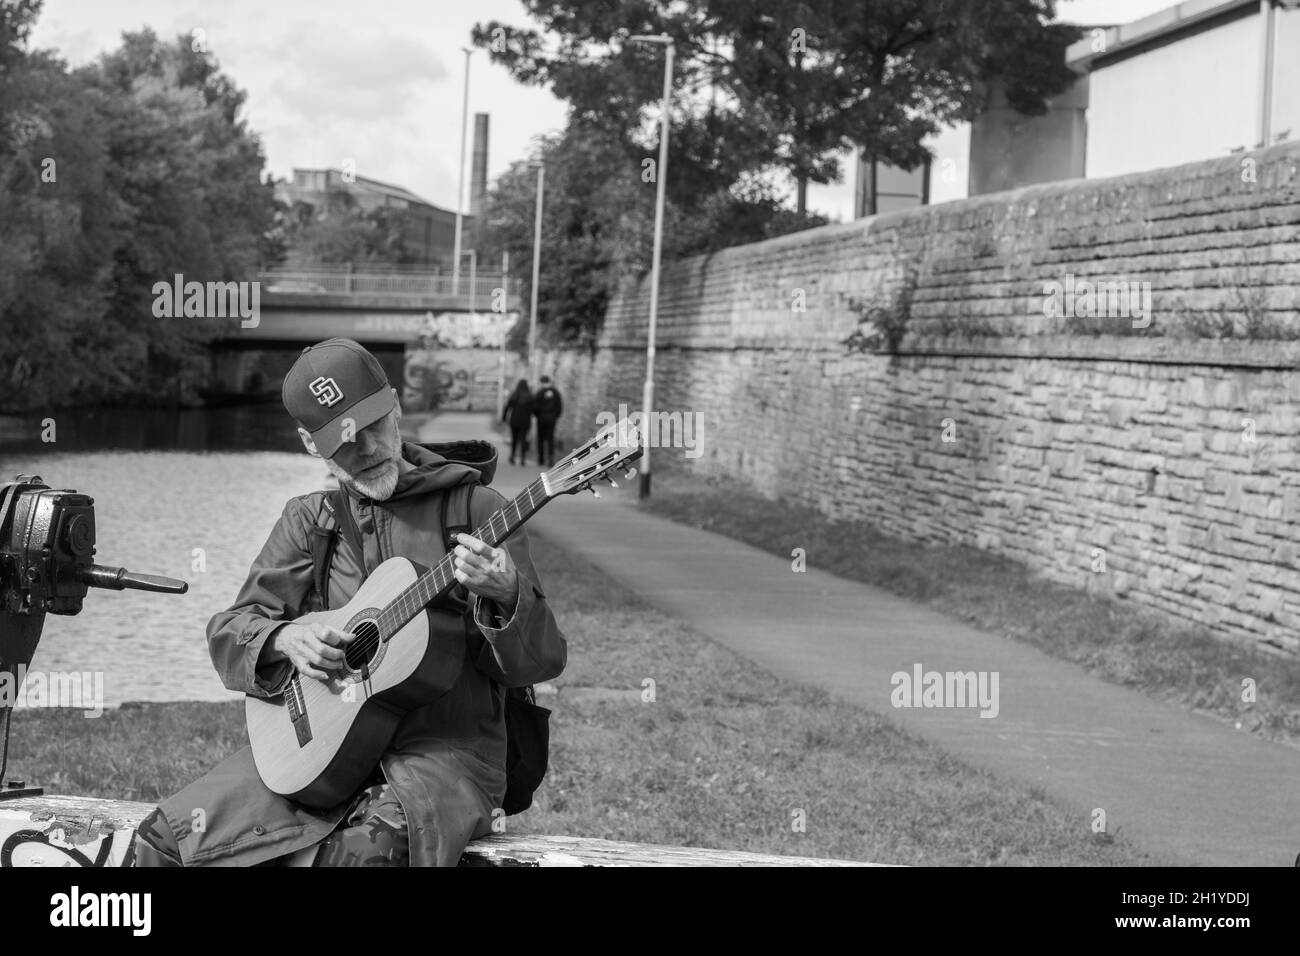 Near the towpath and Leeds and Liverpool Canal in Leeds, an elderly gentleman with a grey beard played acoustic guitar, West Yorkshire, England, UK. Stock Photo